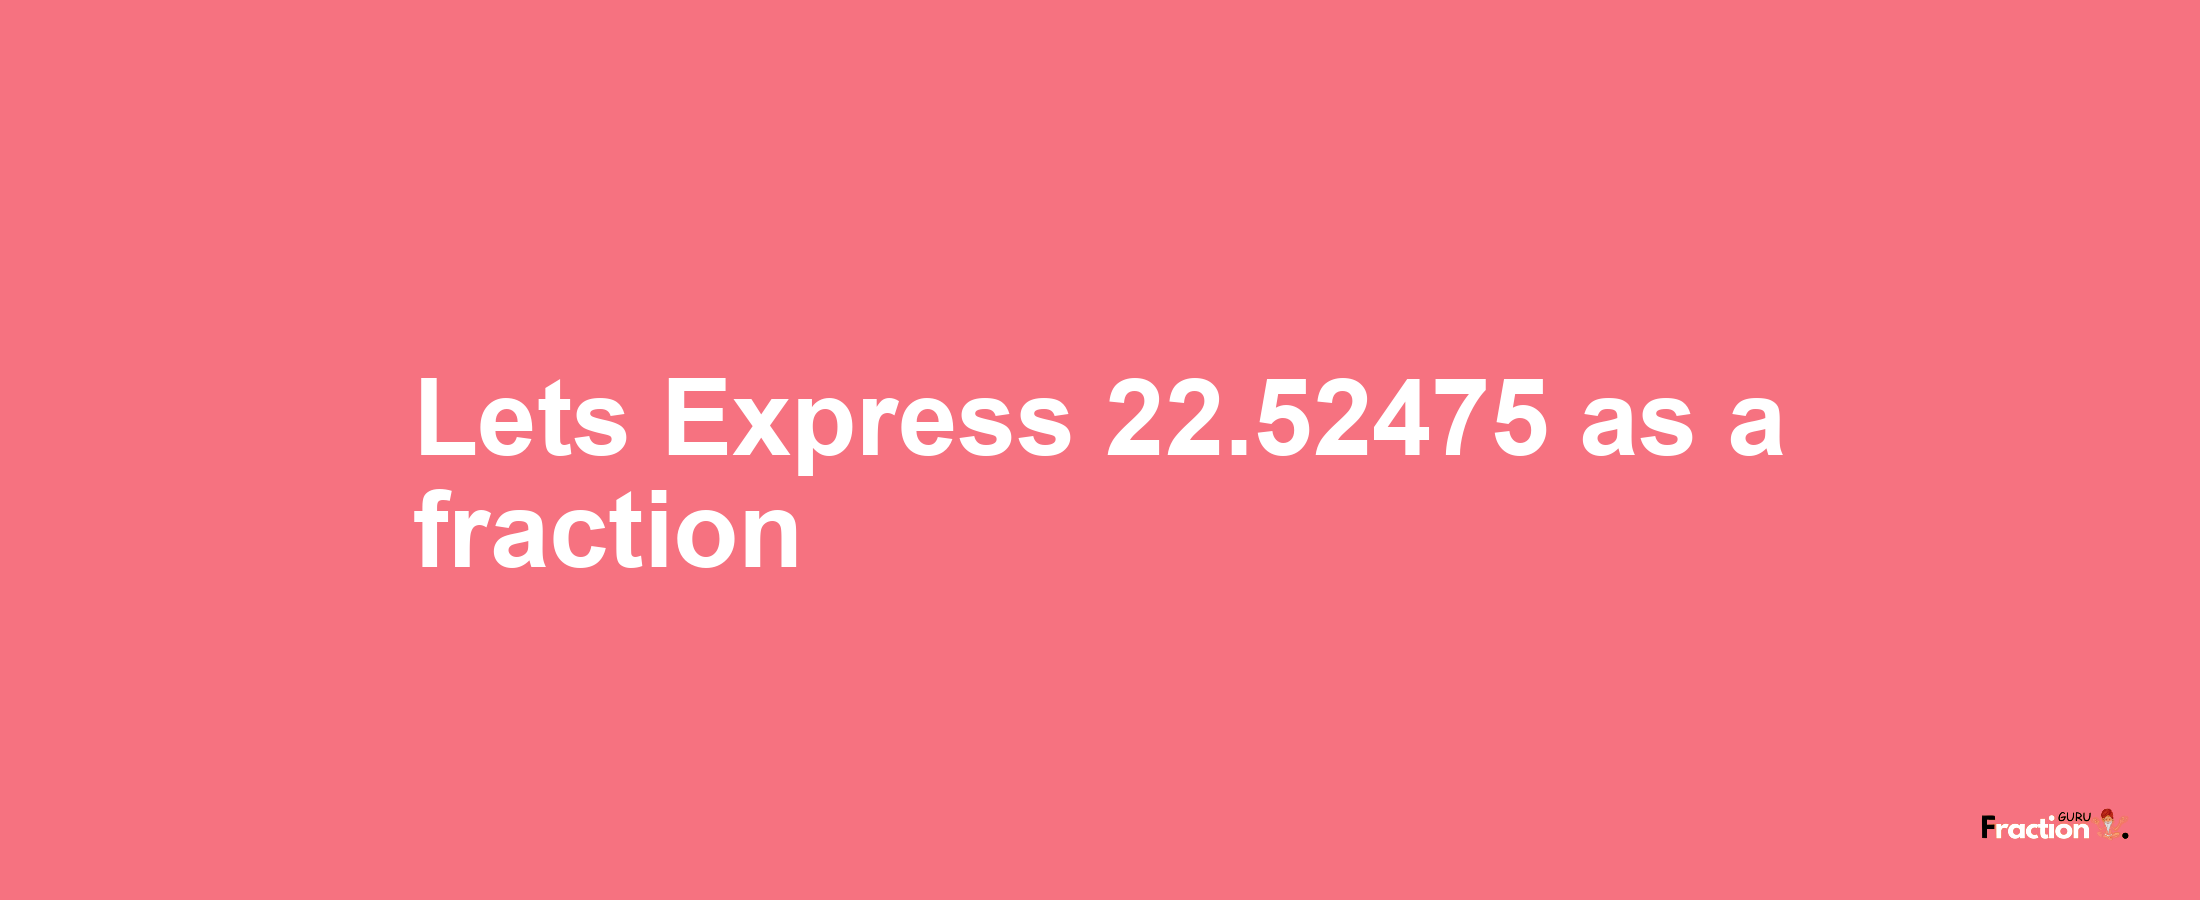 Lets Express 22.52475 as afraction